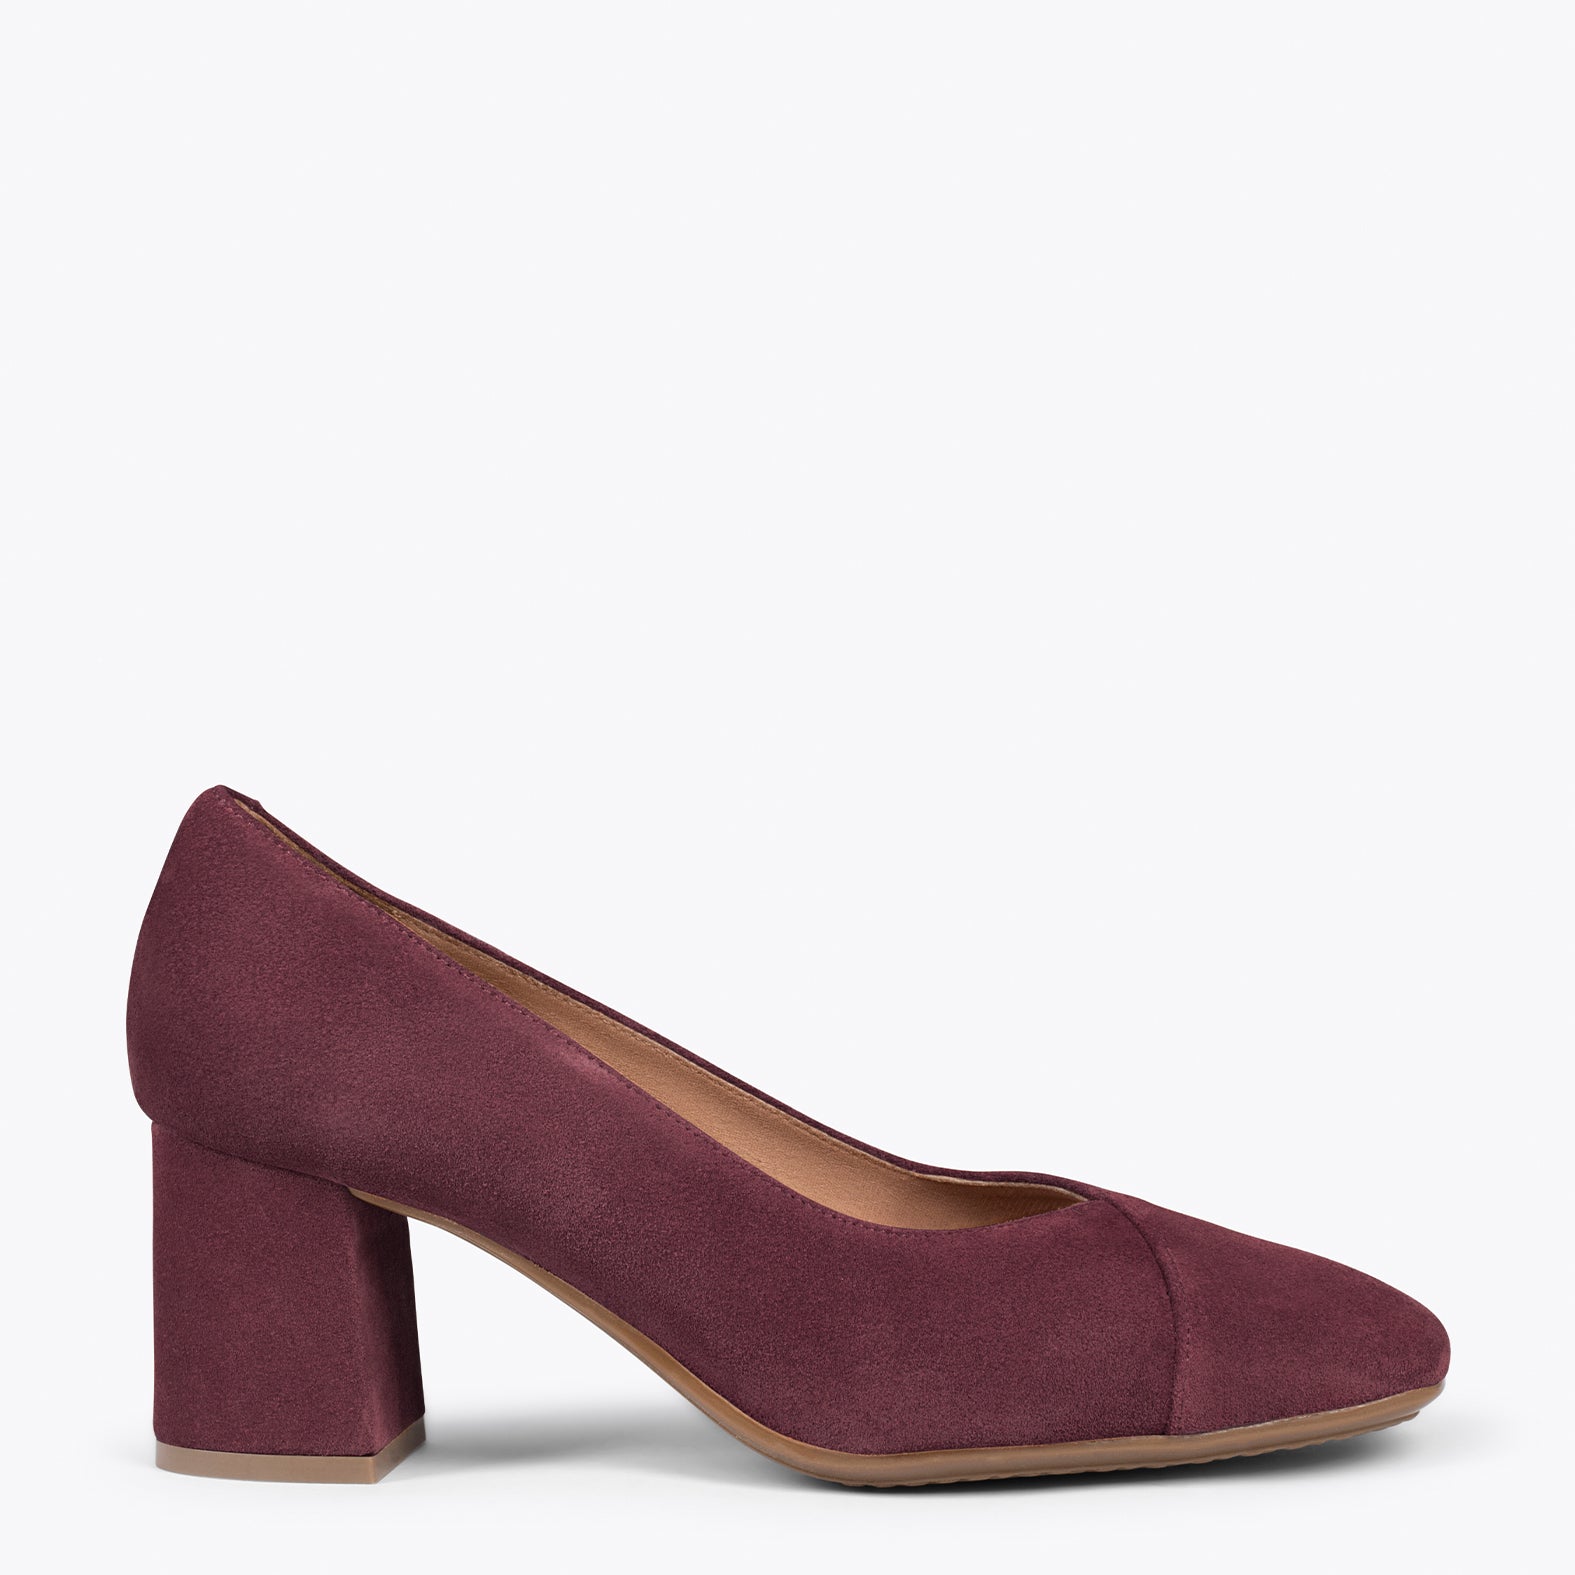 EMMA – BURGUNDY high heels with square toe